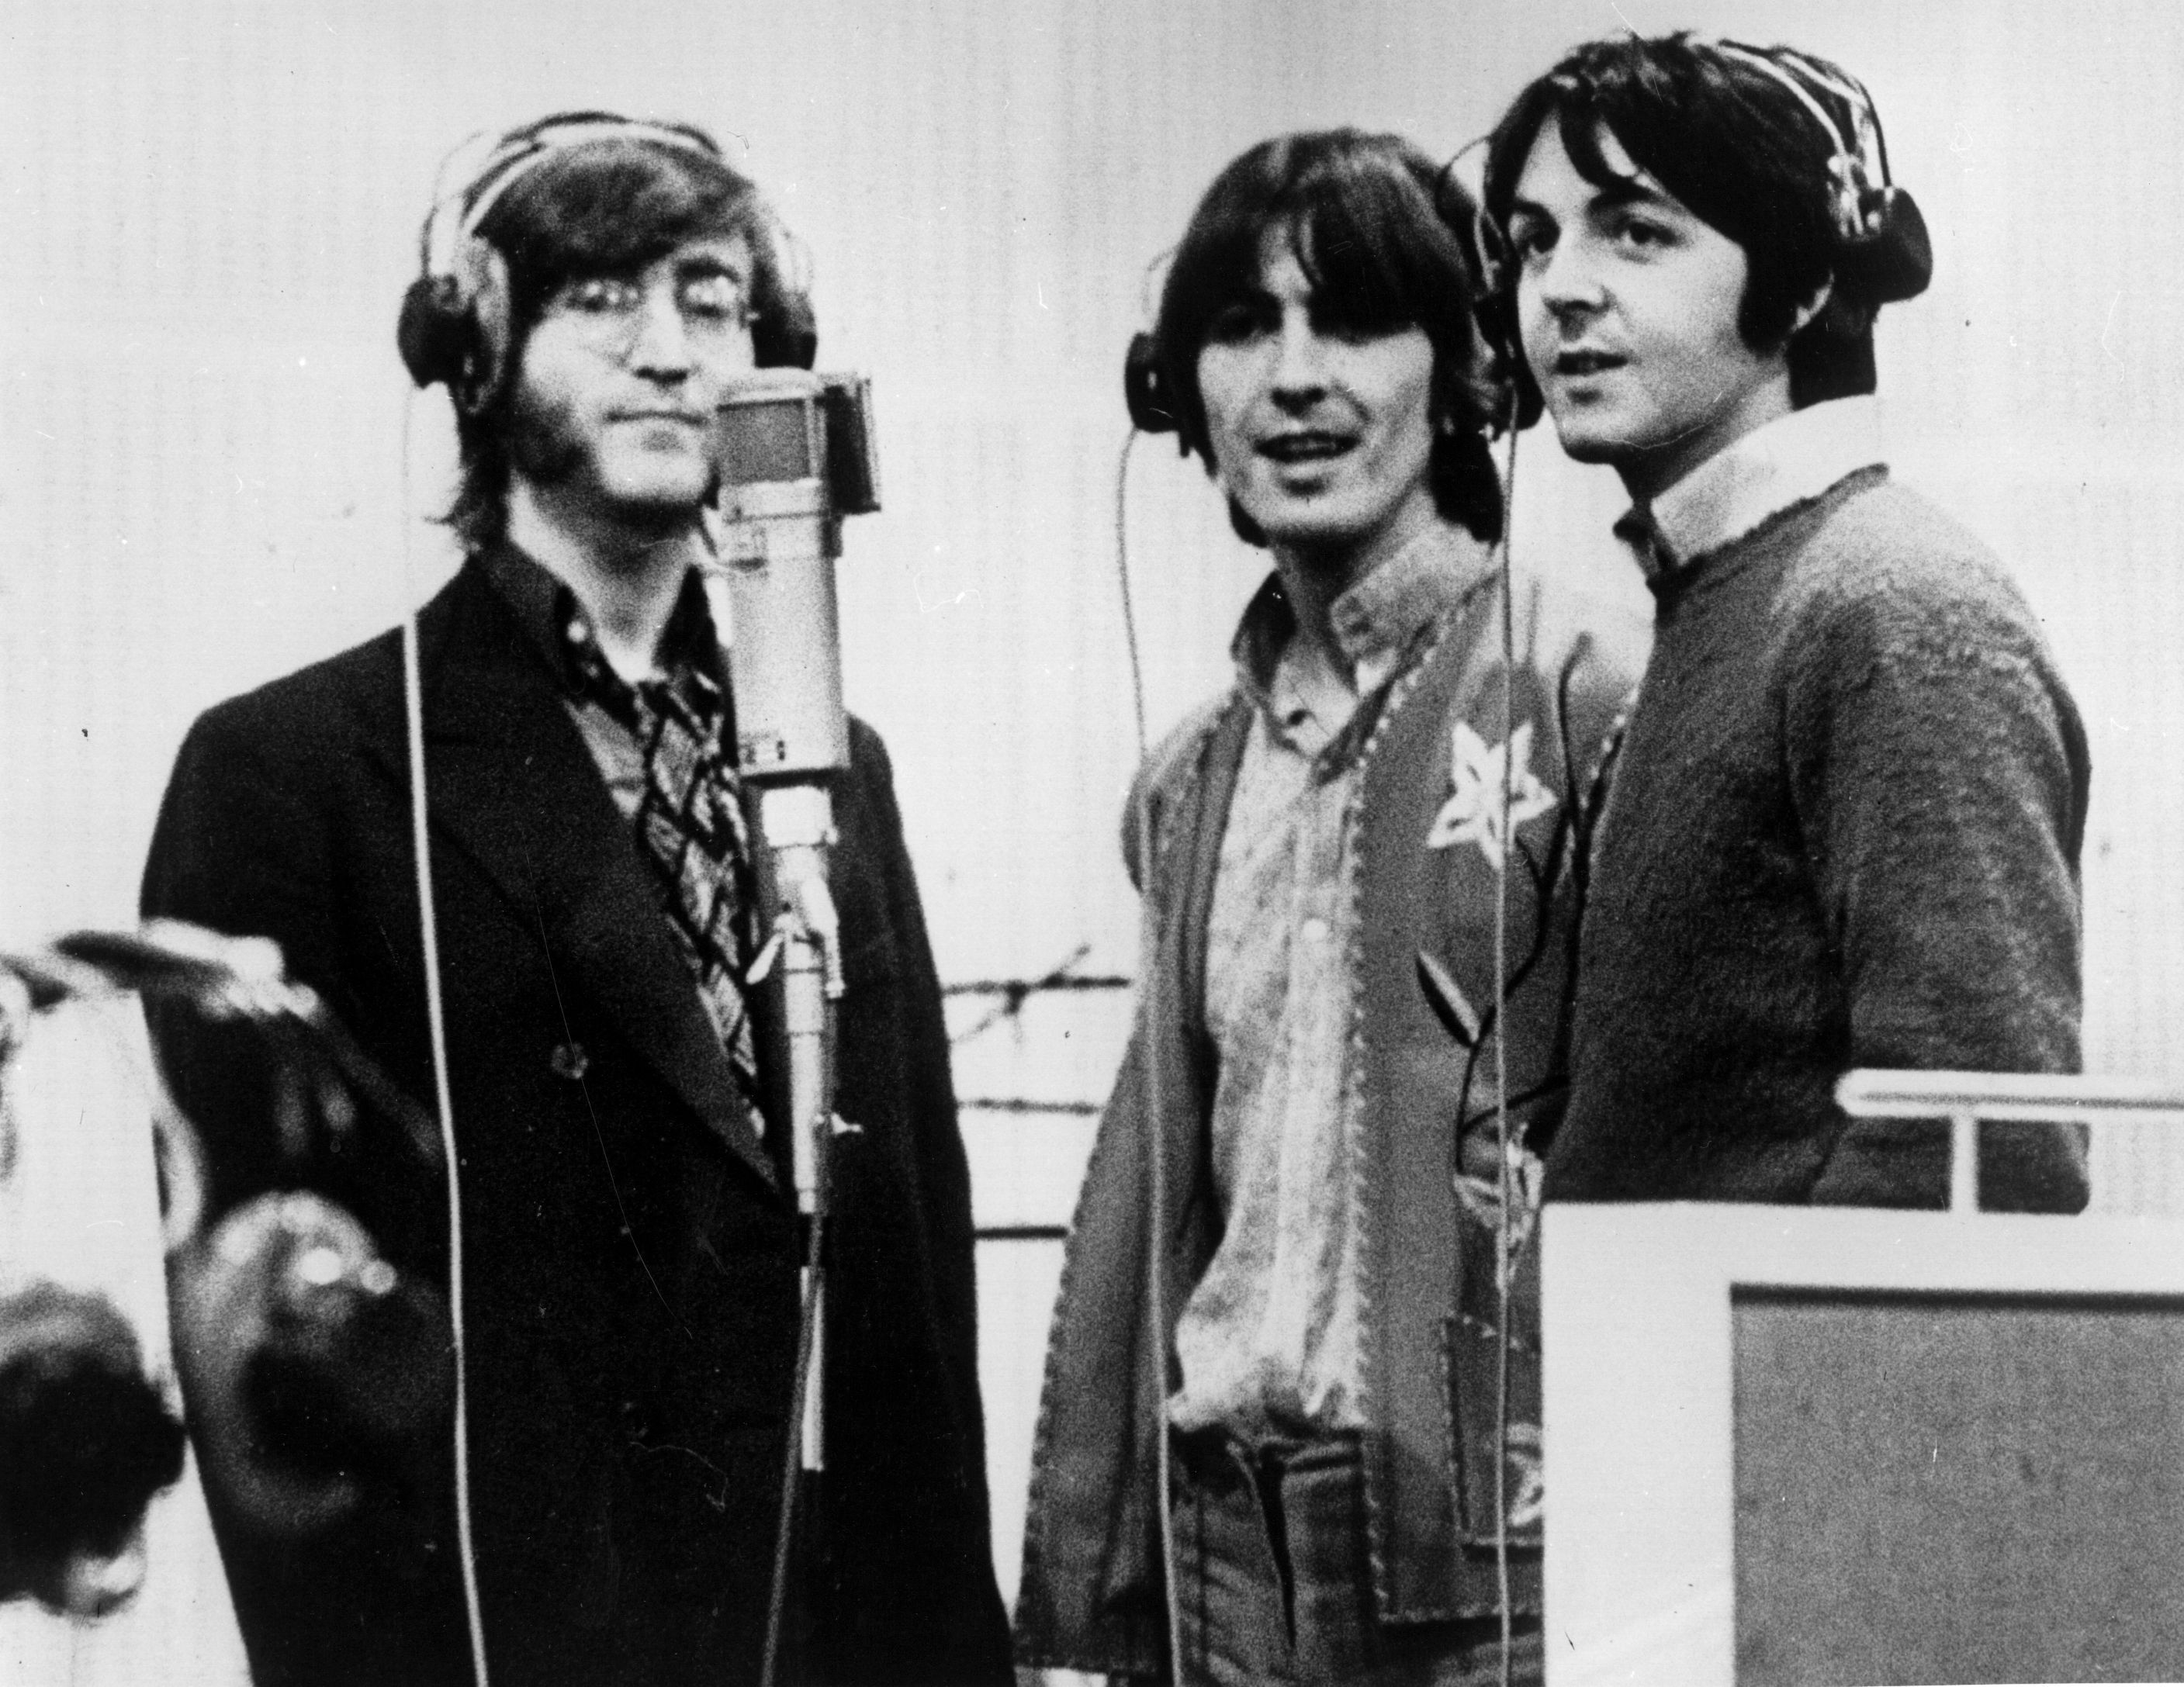 Paul McCartney Shares What He Thinks About When Looking at Photos of George Harrison and John Lennon